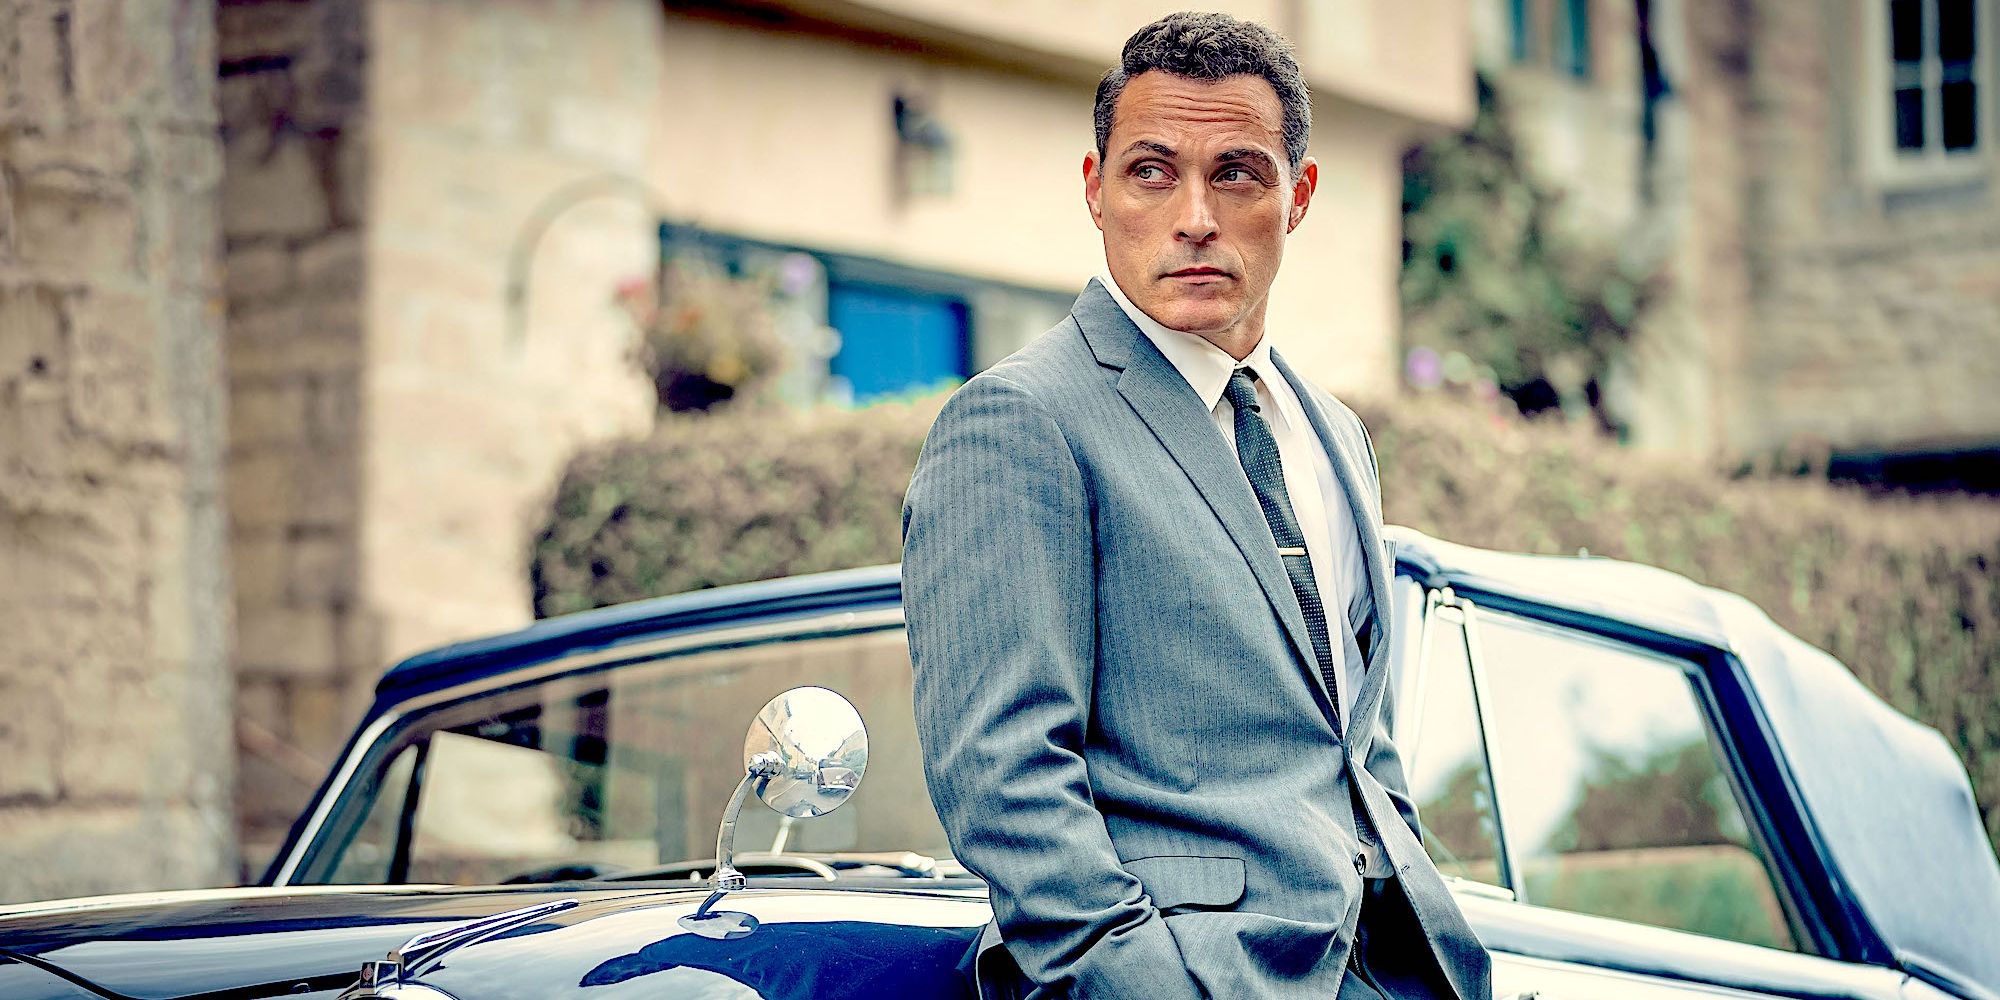 Rufus Sewell as Mark Easterbrook, wearing a suit and leaning against a car in The Pale Horse